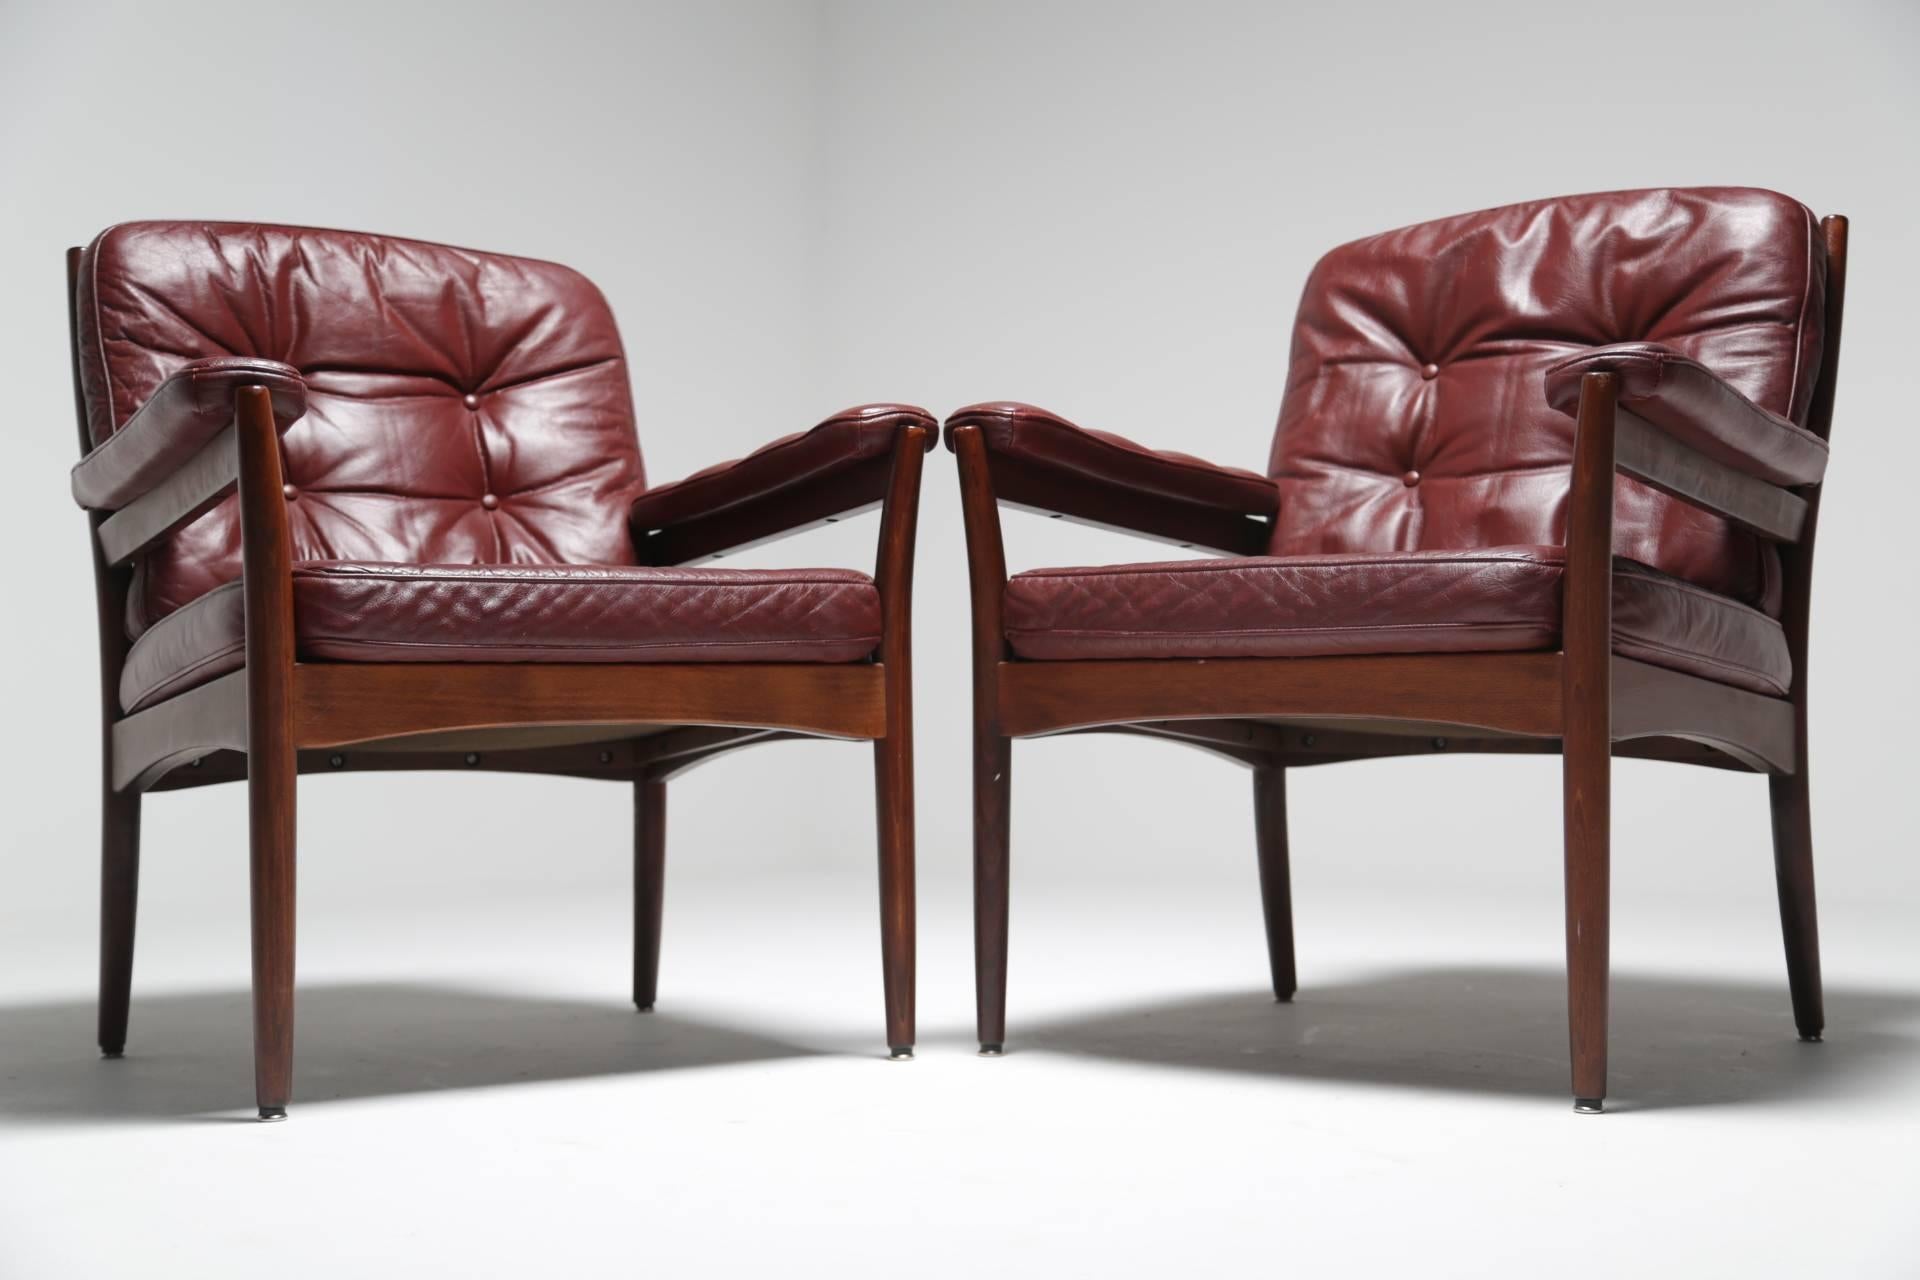 Gote Mobler of Nassjo, Sweden made this pair of gorgeous wine-coloured leather armchairs, circa 1970. They have a hardwood frame and the buttoned leather upholstery is beautifully soft and comfortable. The leather buttoning also extends to the arm